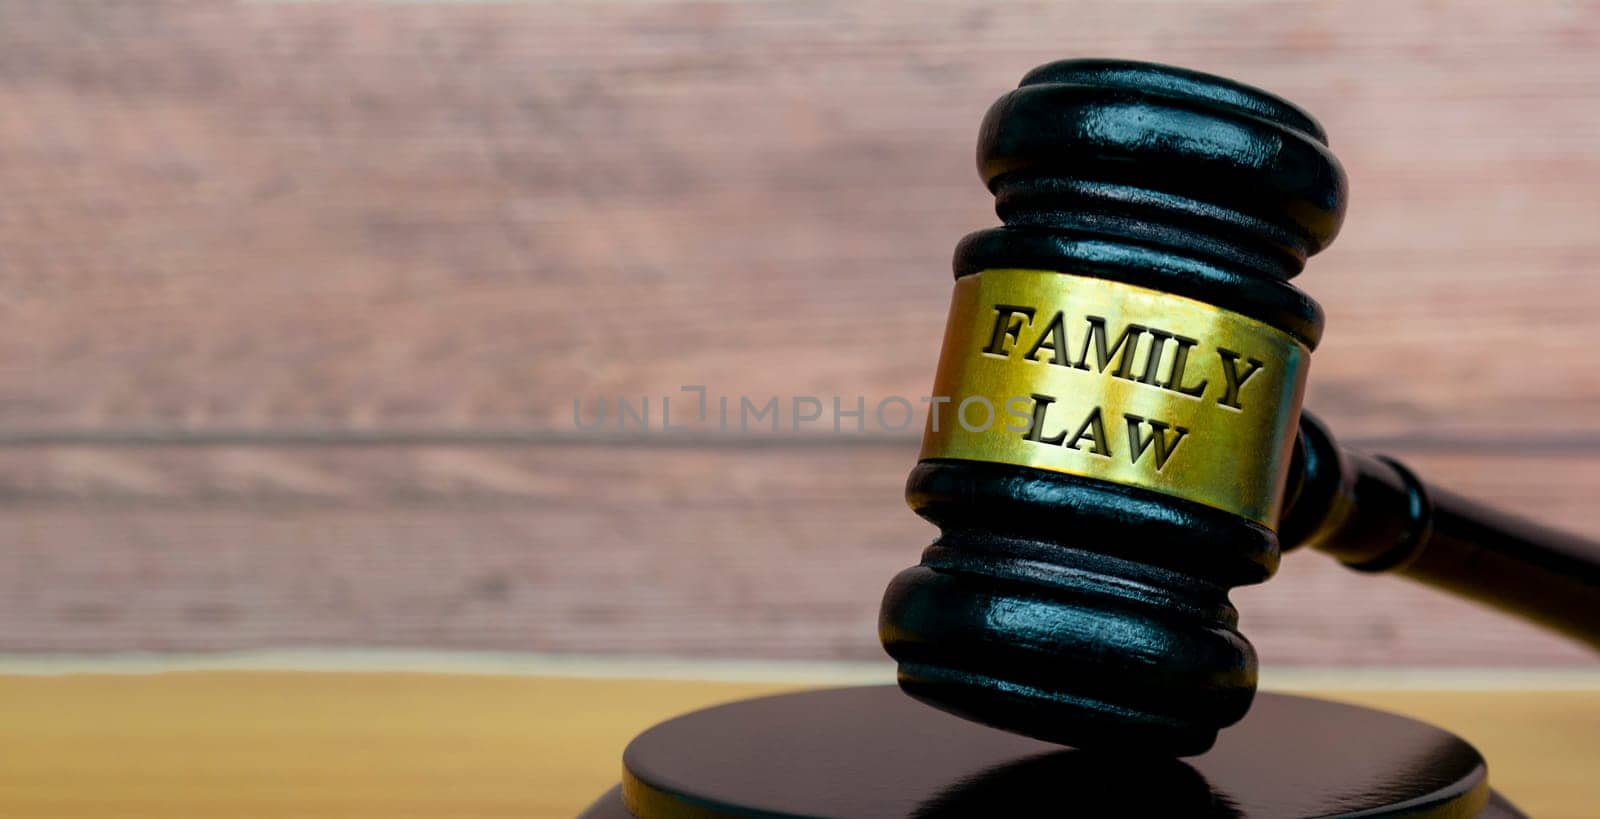 Family law text engraved on lawyer's gavel. Legal and law concept